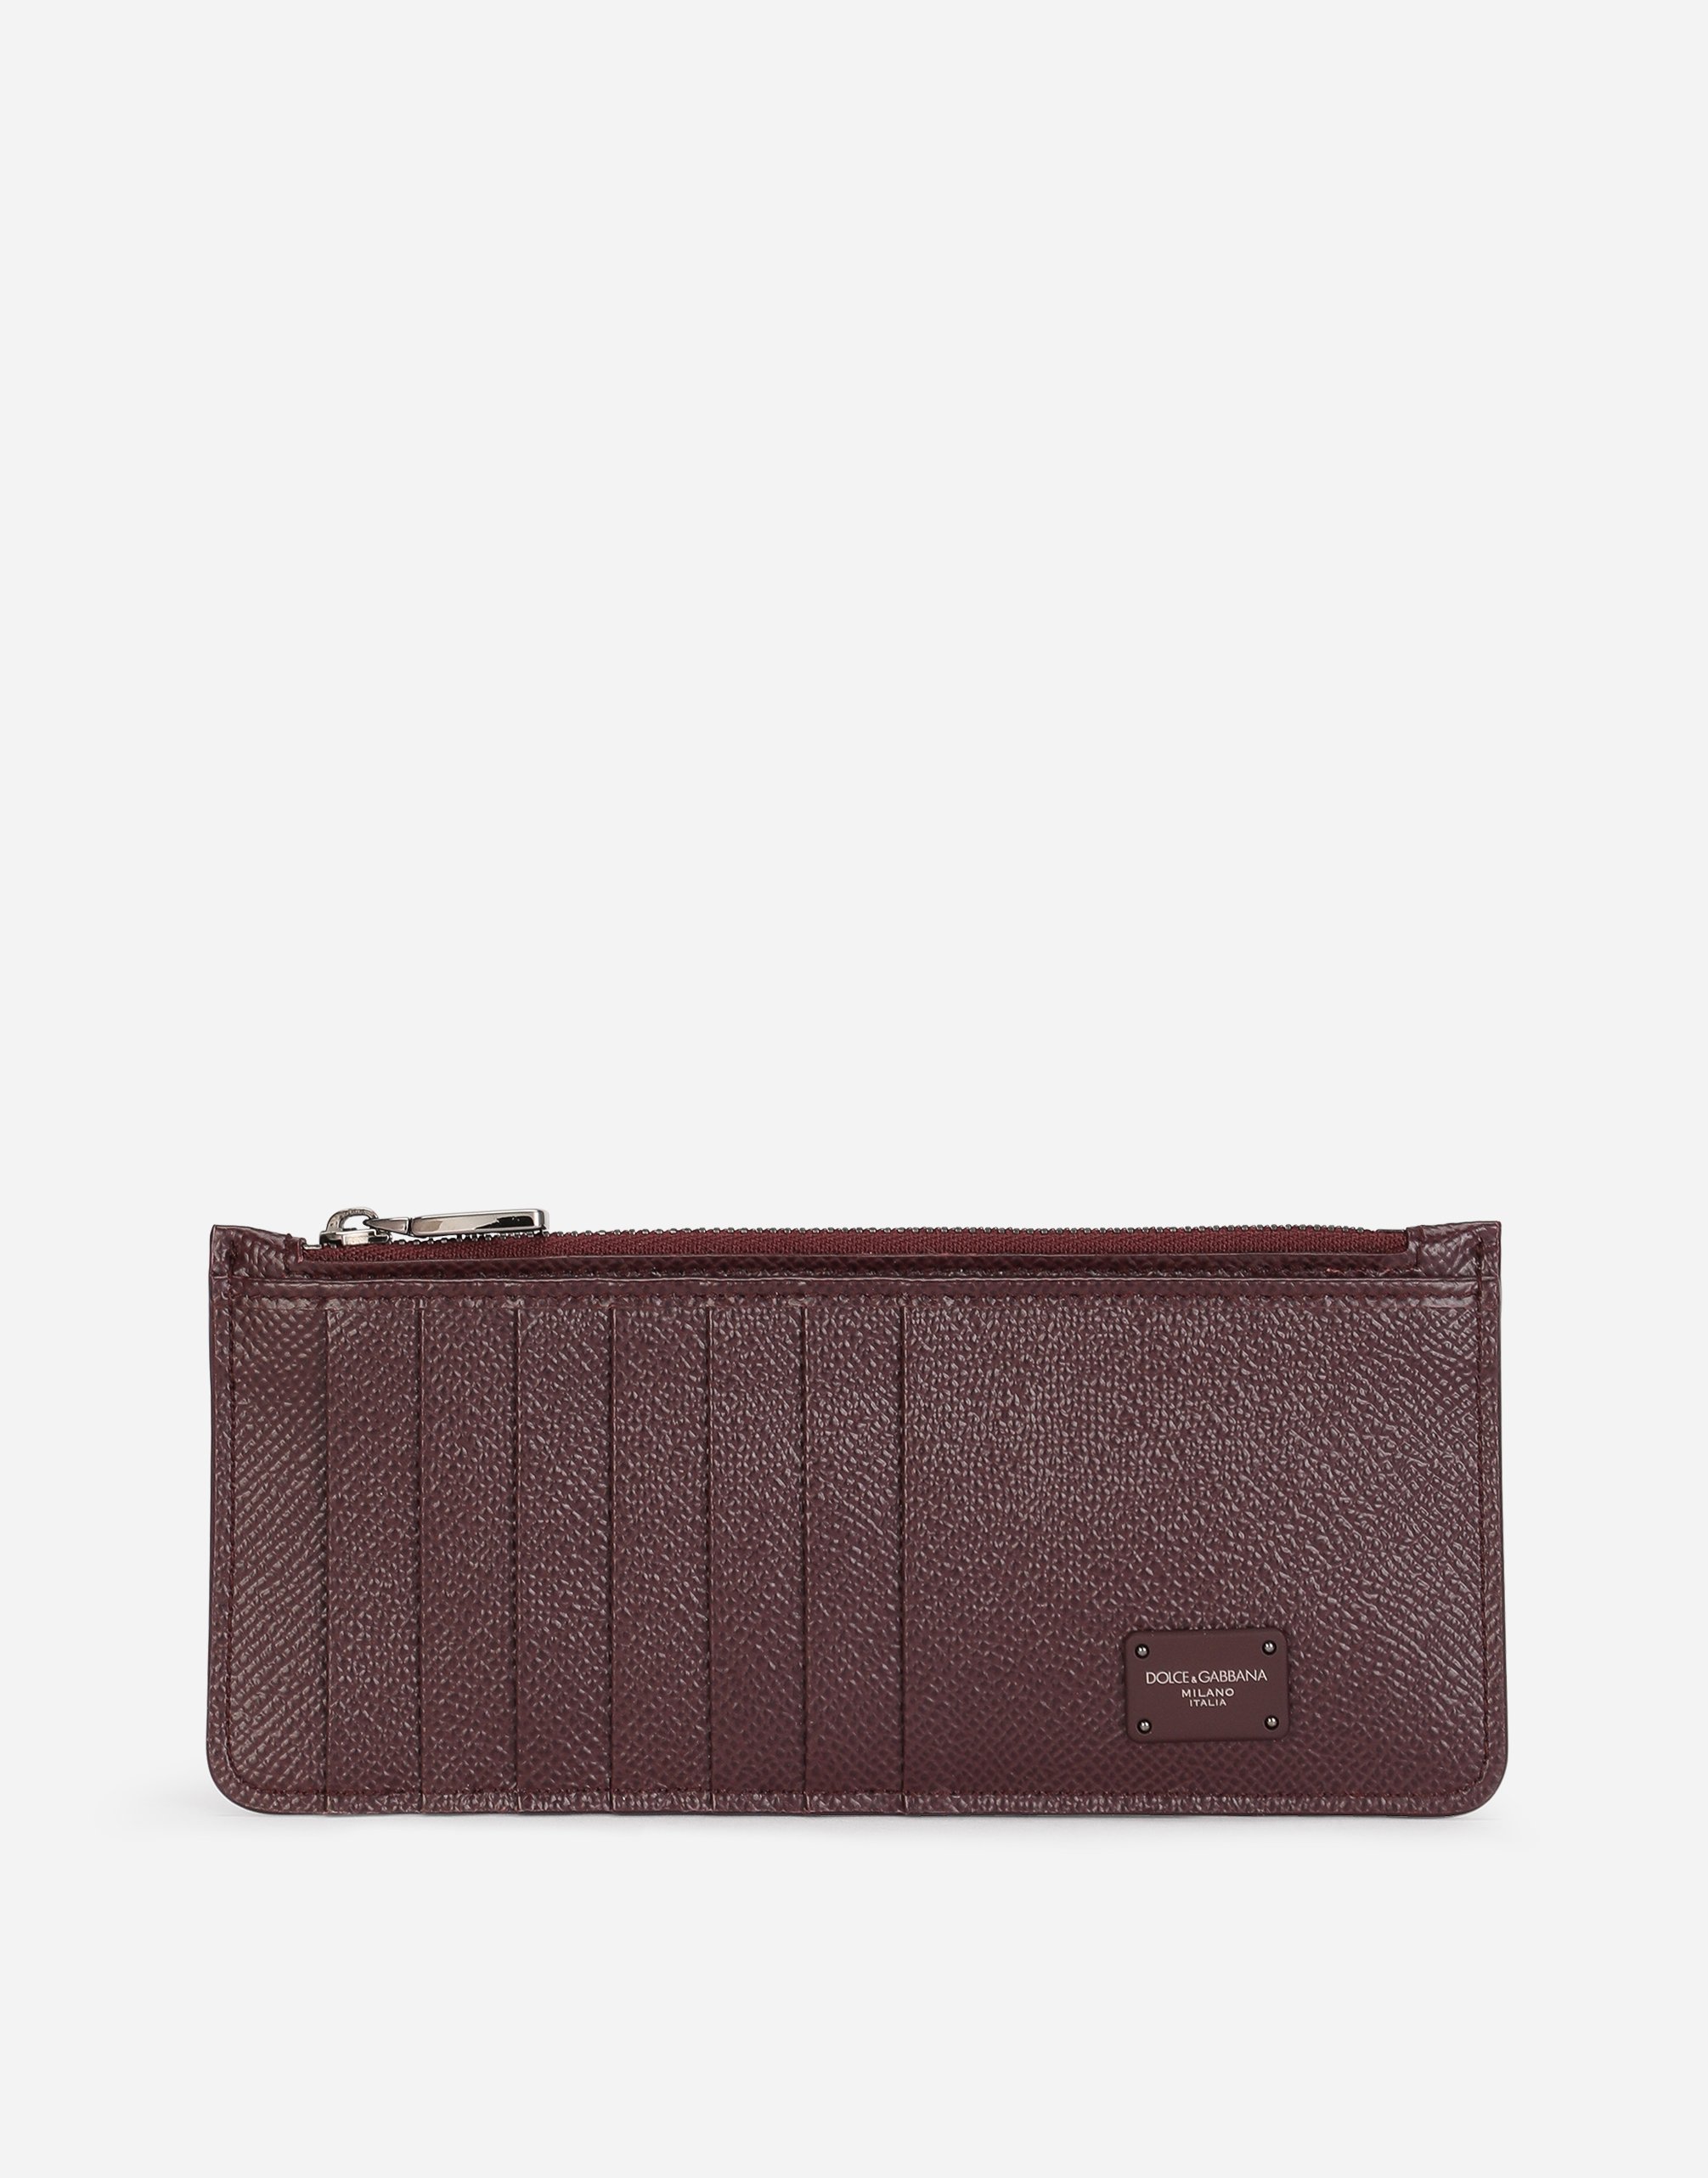 Dauphine calfskin vertical card holder with branded tag in Bordeaux